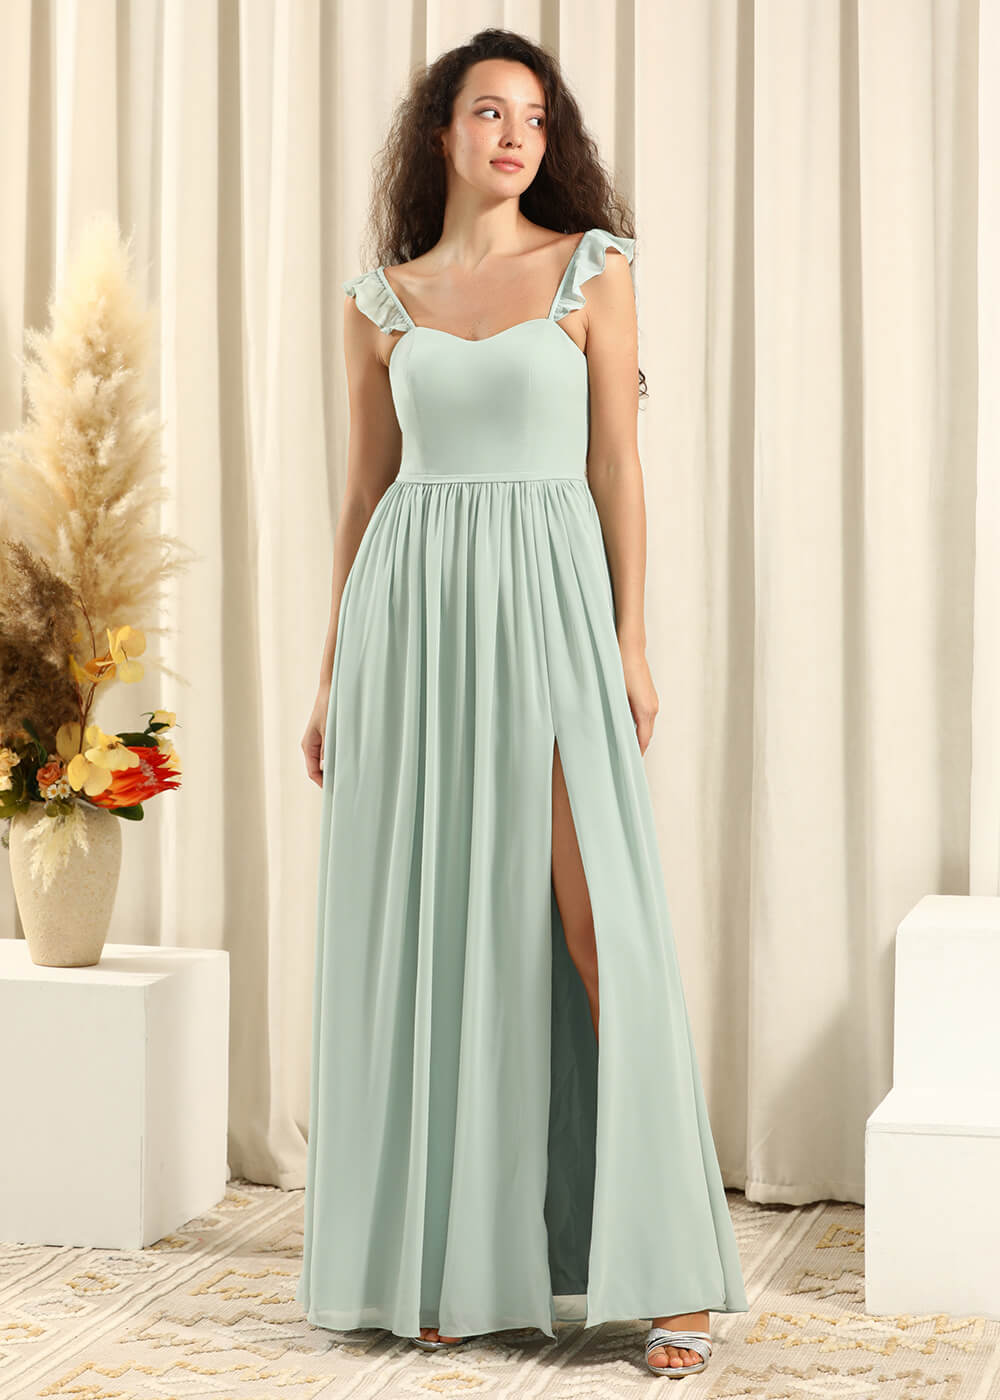 Sweetheart Neck Strap With Ruffles A-line Chiffon Long Bridesmaid Dres